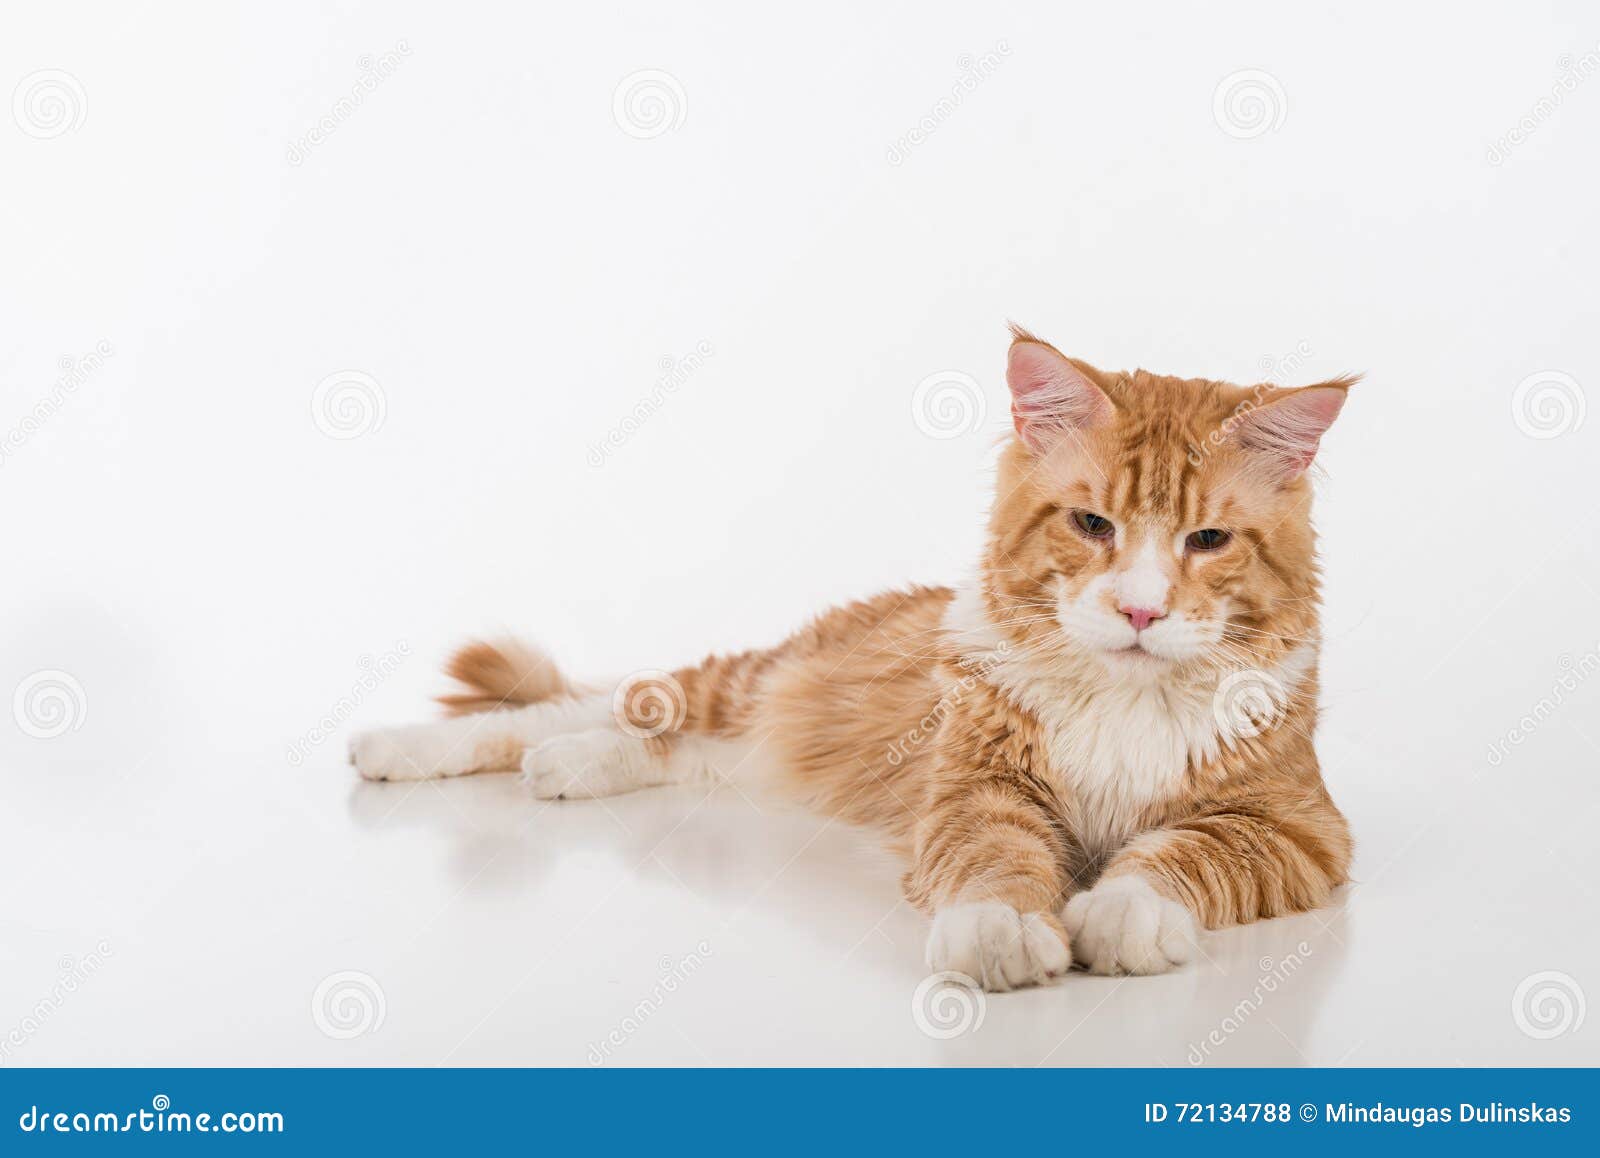 Curious Maine Coon Cat Sitting On The White Table With Reflection